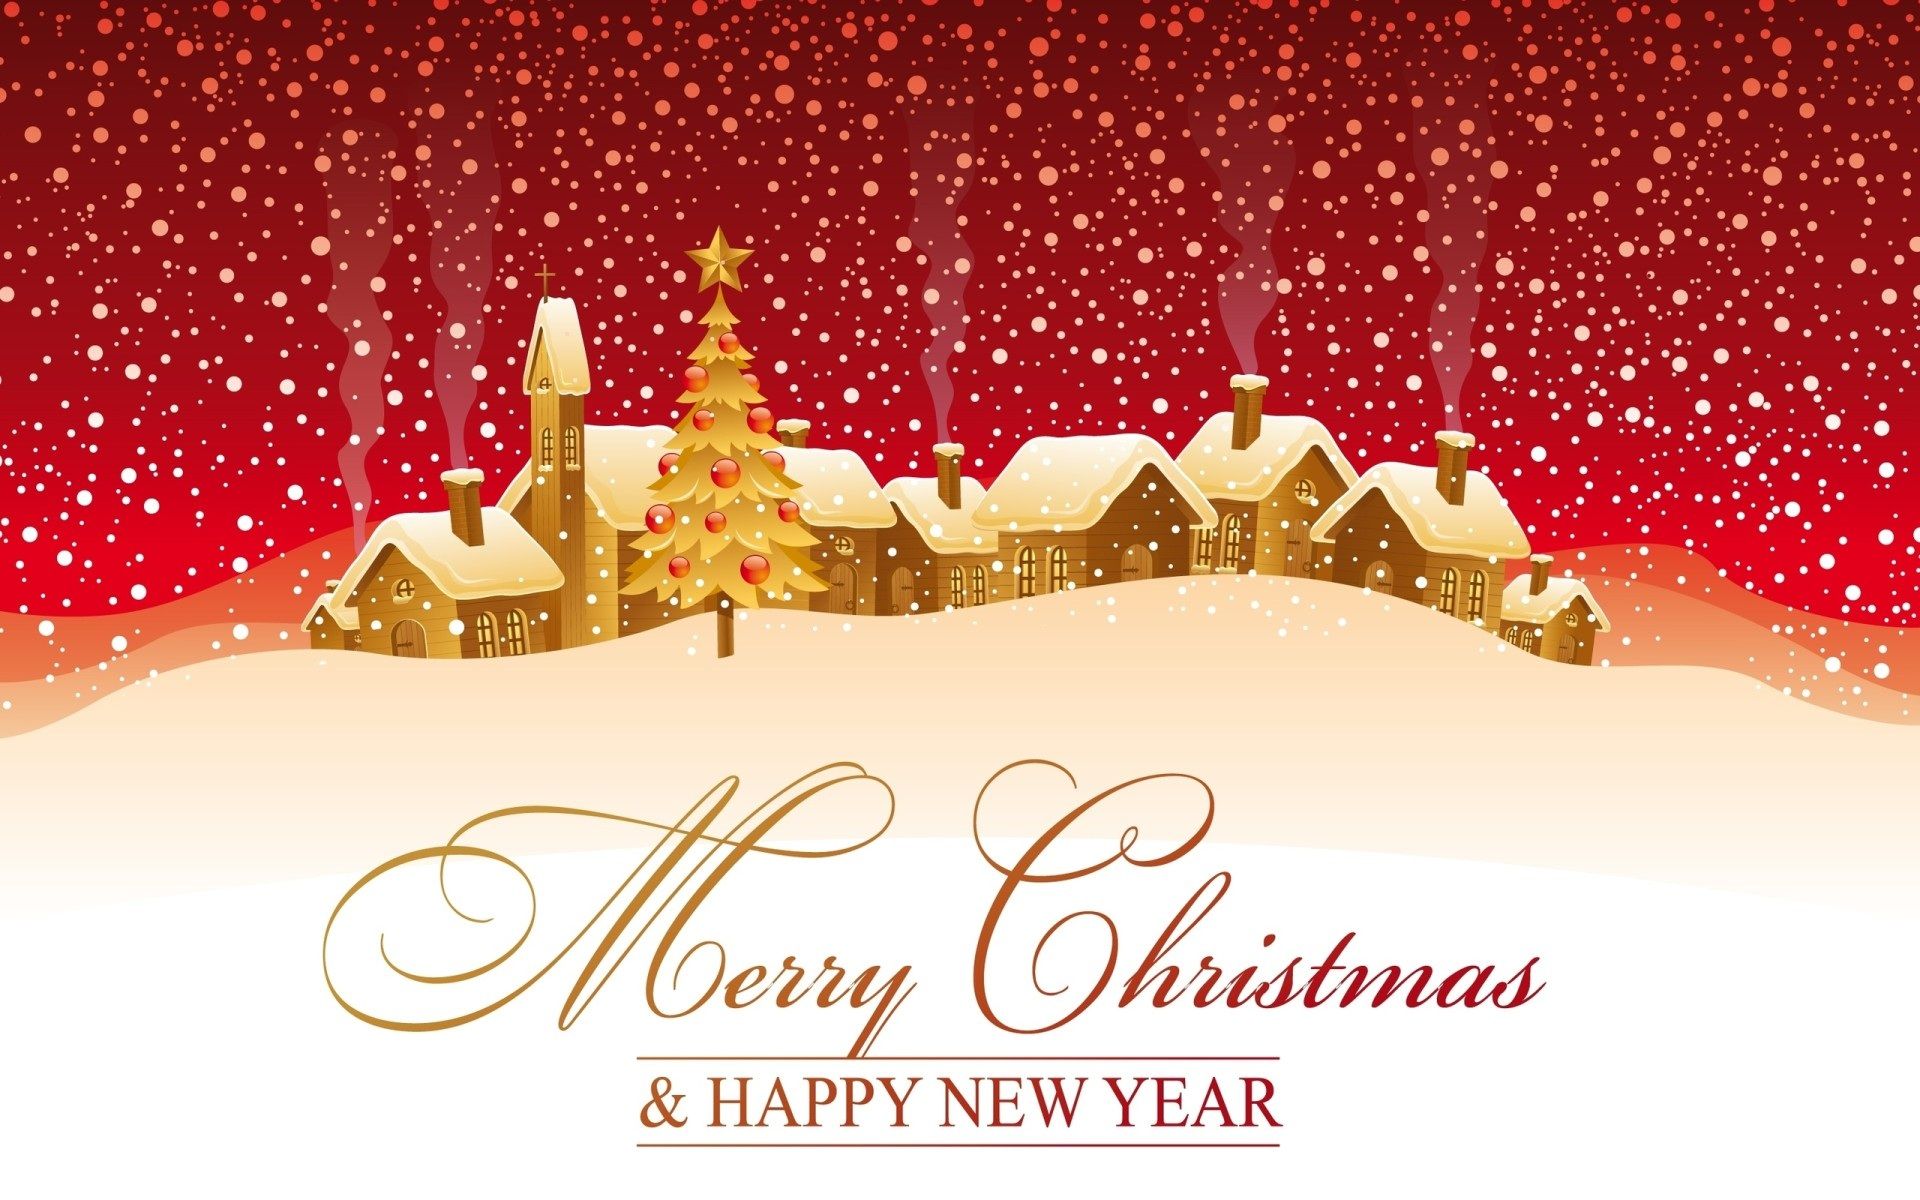 Merry Christmas and Happy New Year. Merry christmas card greetings, Merry christmas wishes, Happy new year wallpaper